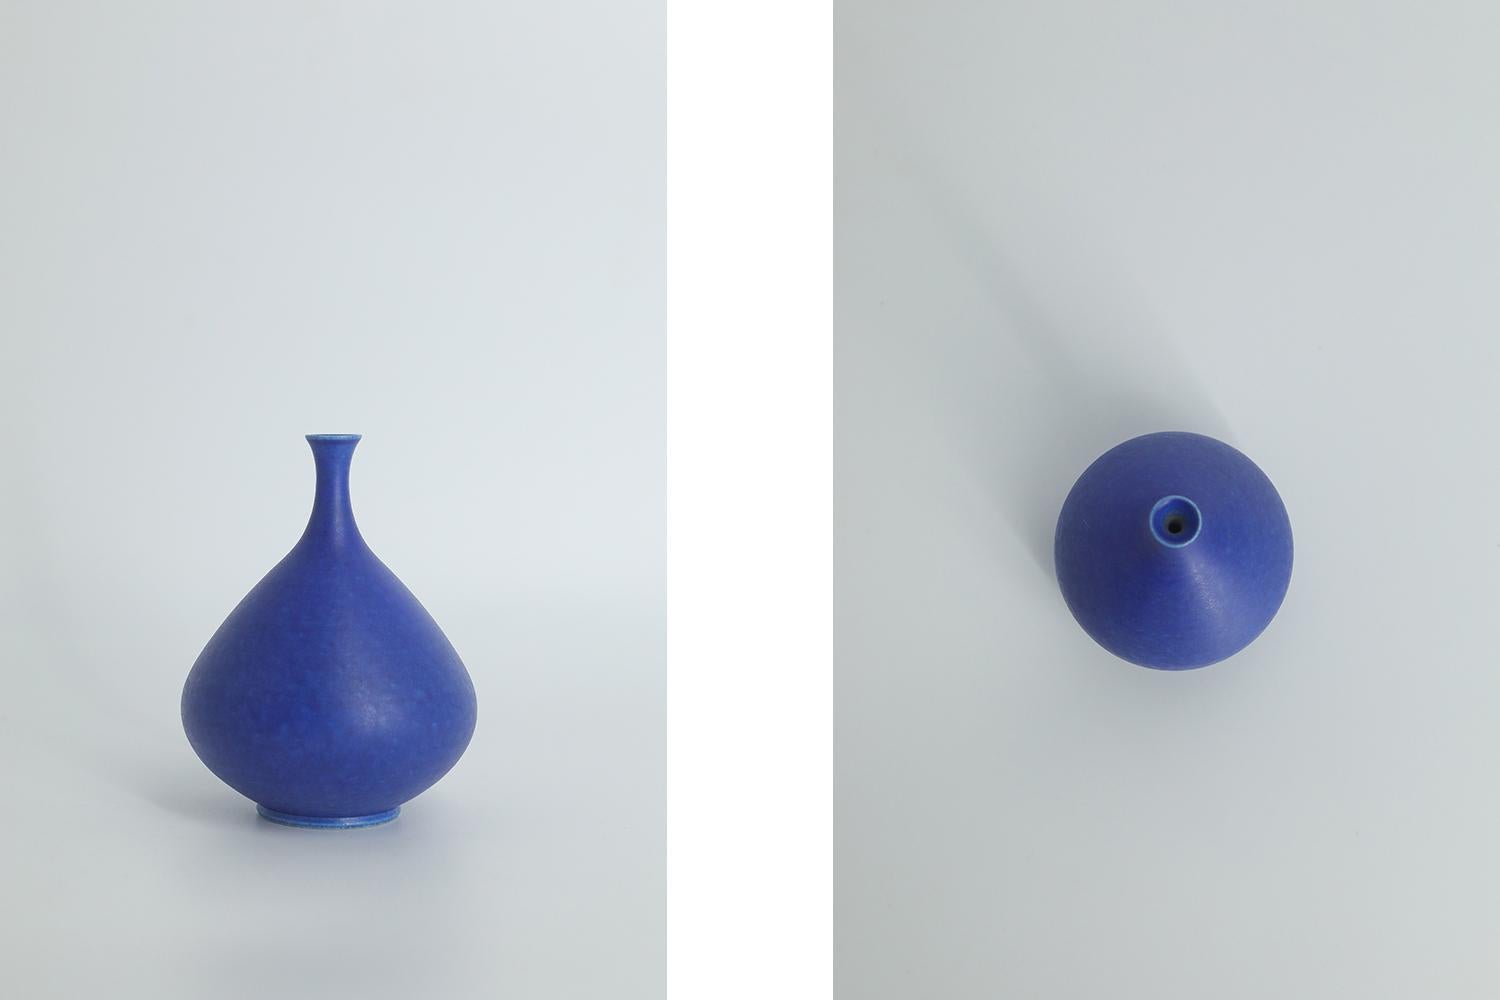 This miniature, collectible stoneware vase was designed by Gunnar Borg for the Swedish manufacture Höganäs Keramik during the 1960s. Handmade by a Master, with the utmost care and attention to details. The cobalt blue colored vase. Signed with the